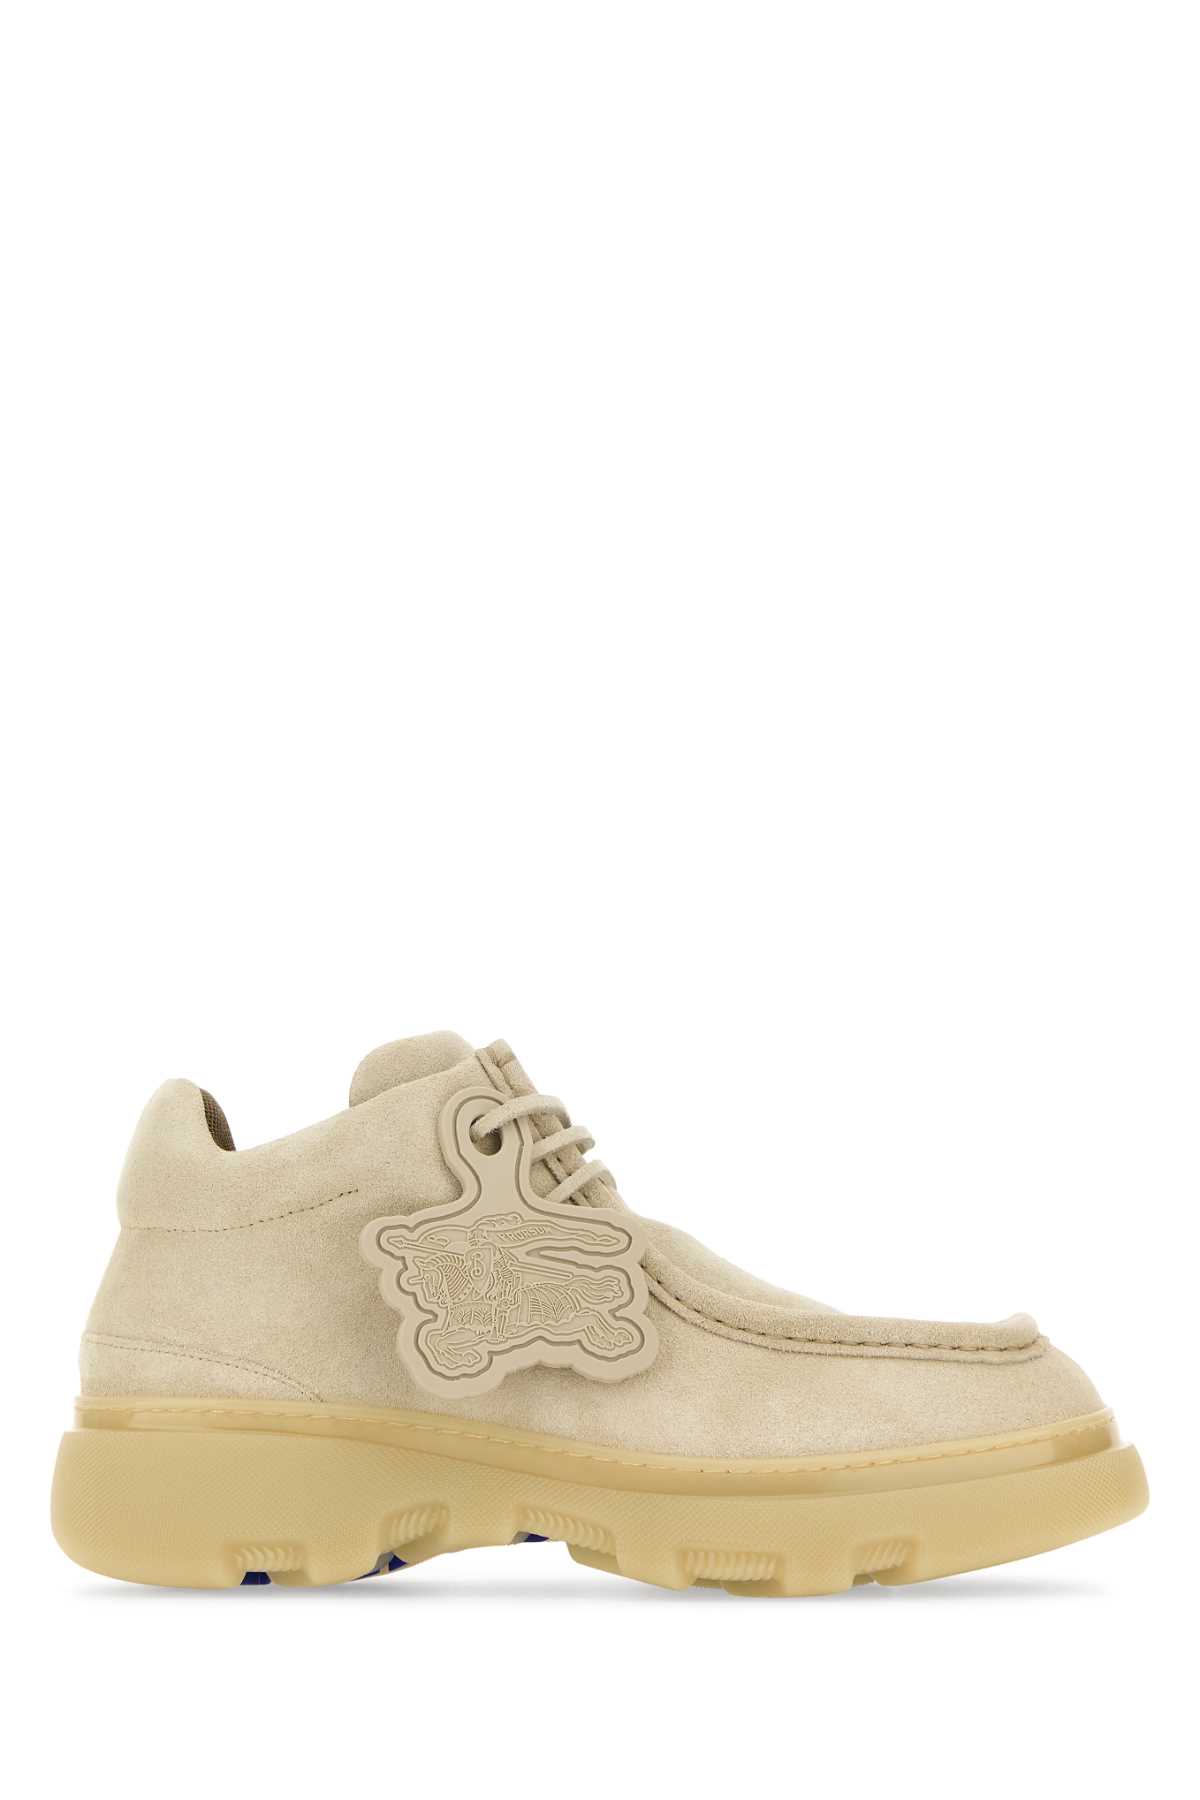 Sand Suede Creeper Lace-up Shoes